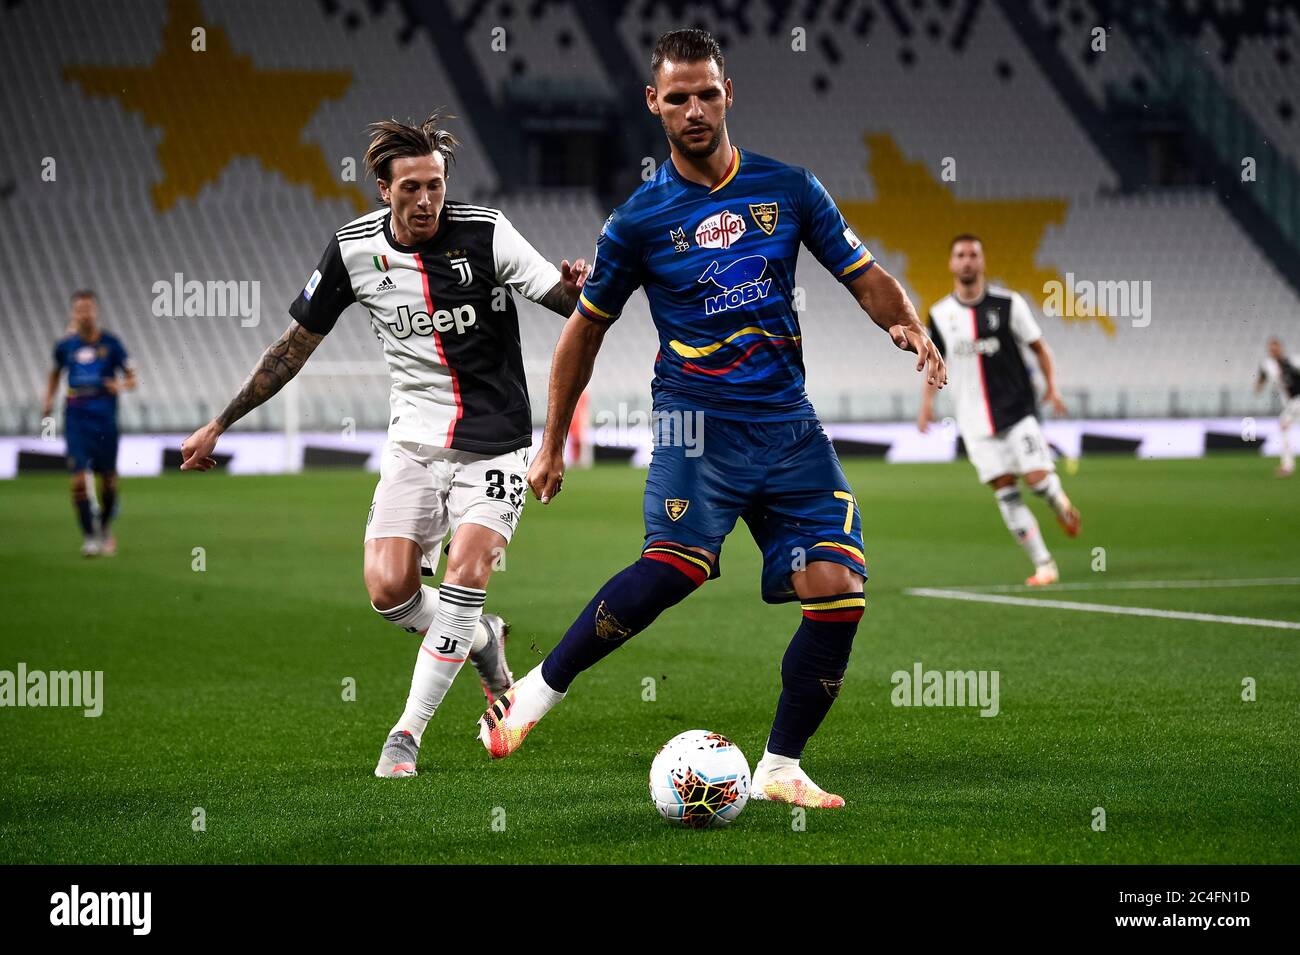 Turin, Italy. 26th June, 2020. TURIN, ITALY - June 26, 2020: Panagiotis Tachtsidis of US Lecce is challenged by Federico Bernardeschi of Juventus FC during the Serie A football match between Juventus FC and US Lecce. (Photo by Nicolò Campo/Sipa USA) Credit: Sipa USA/Alamy Live News Stock Photo